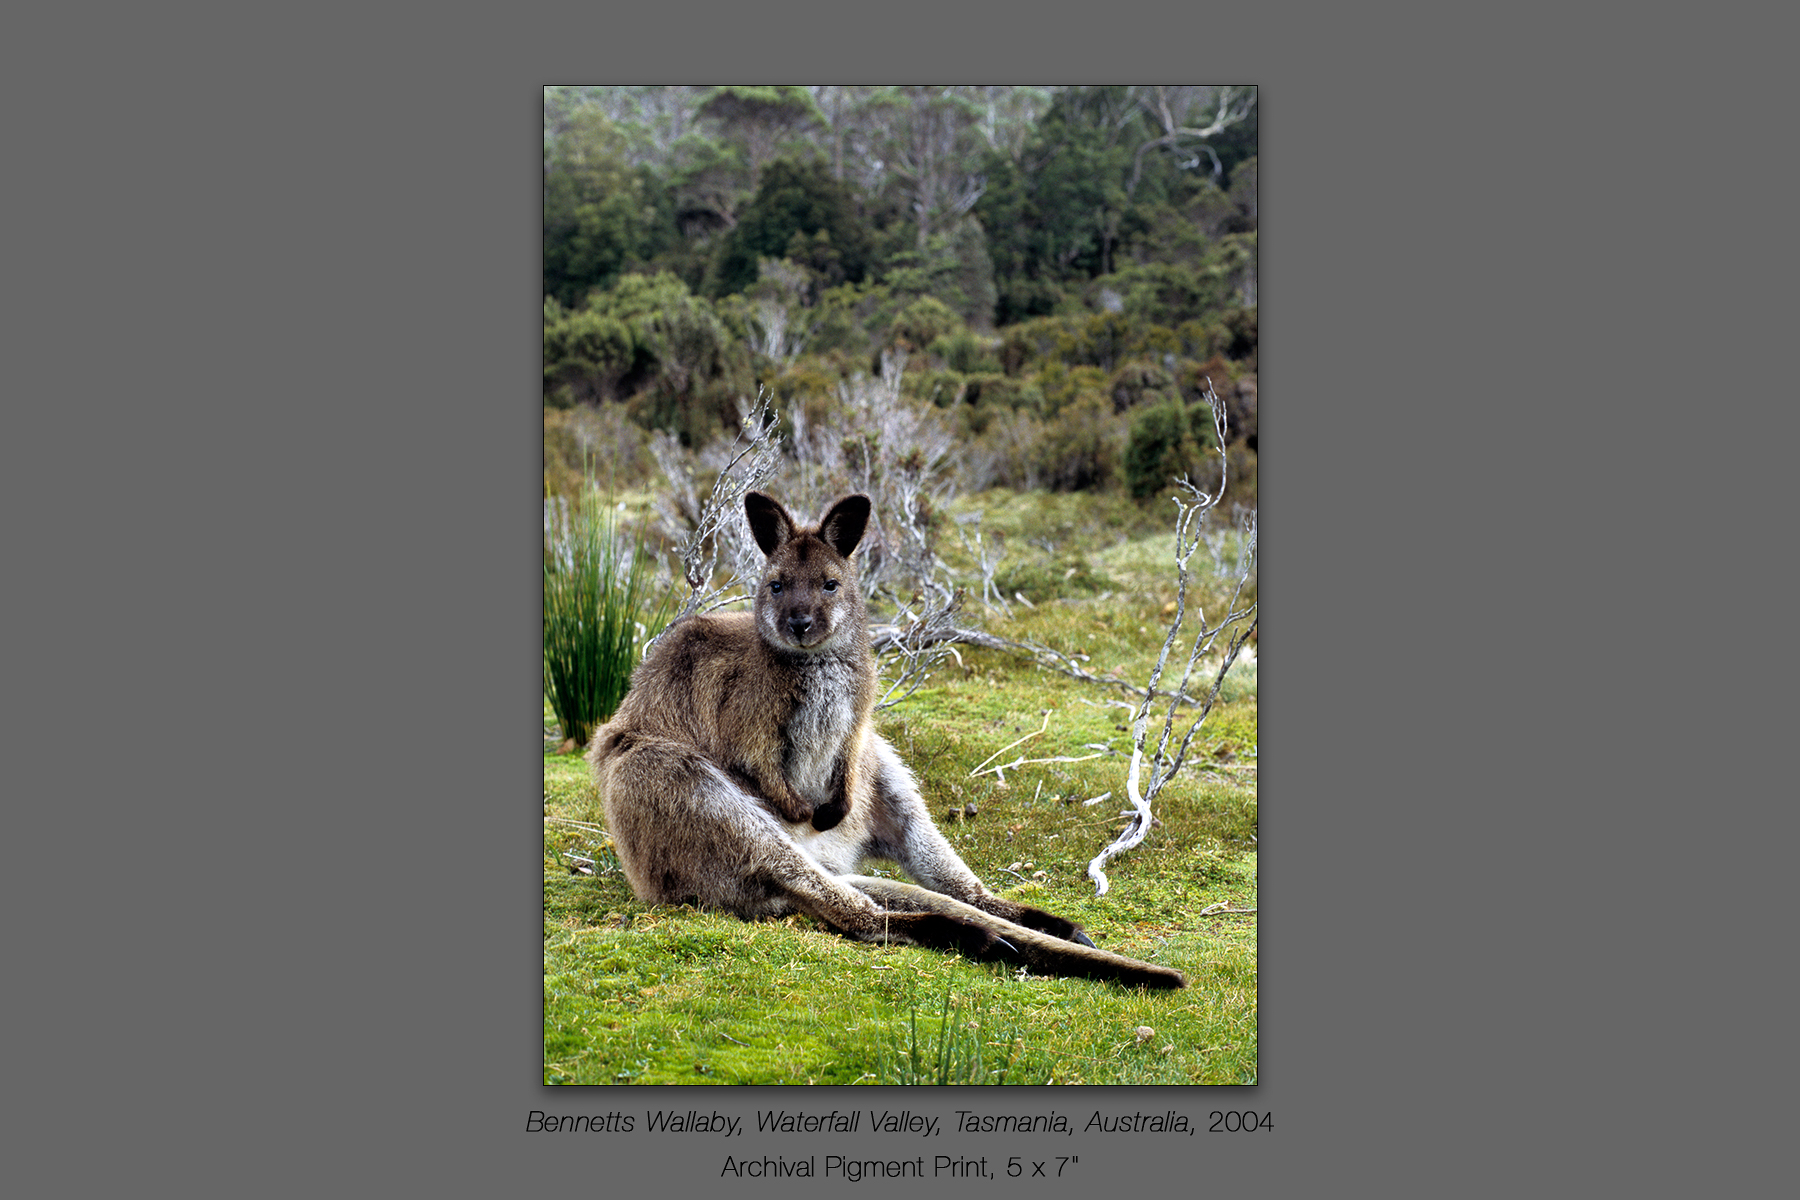 Bennetts Wallaby, Waterfall Valley, Cradle Mountain - Lake St. C